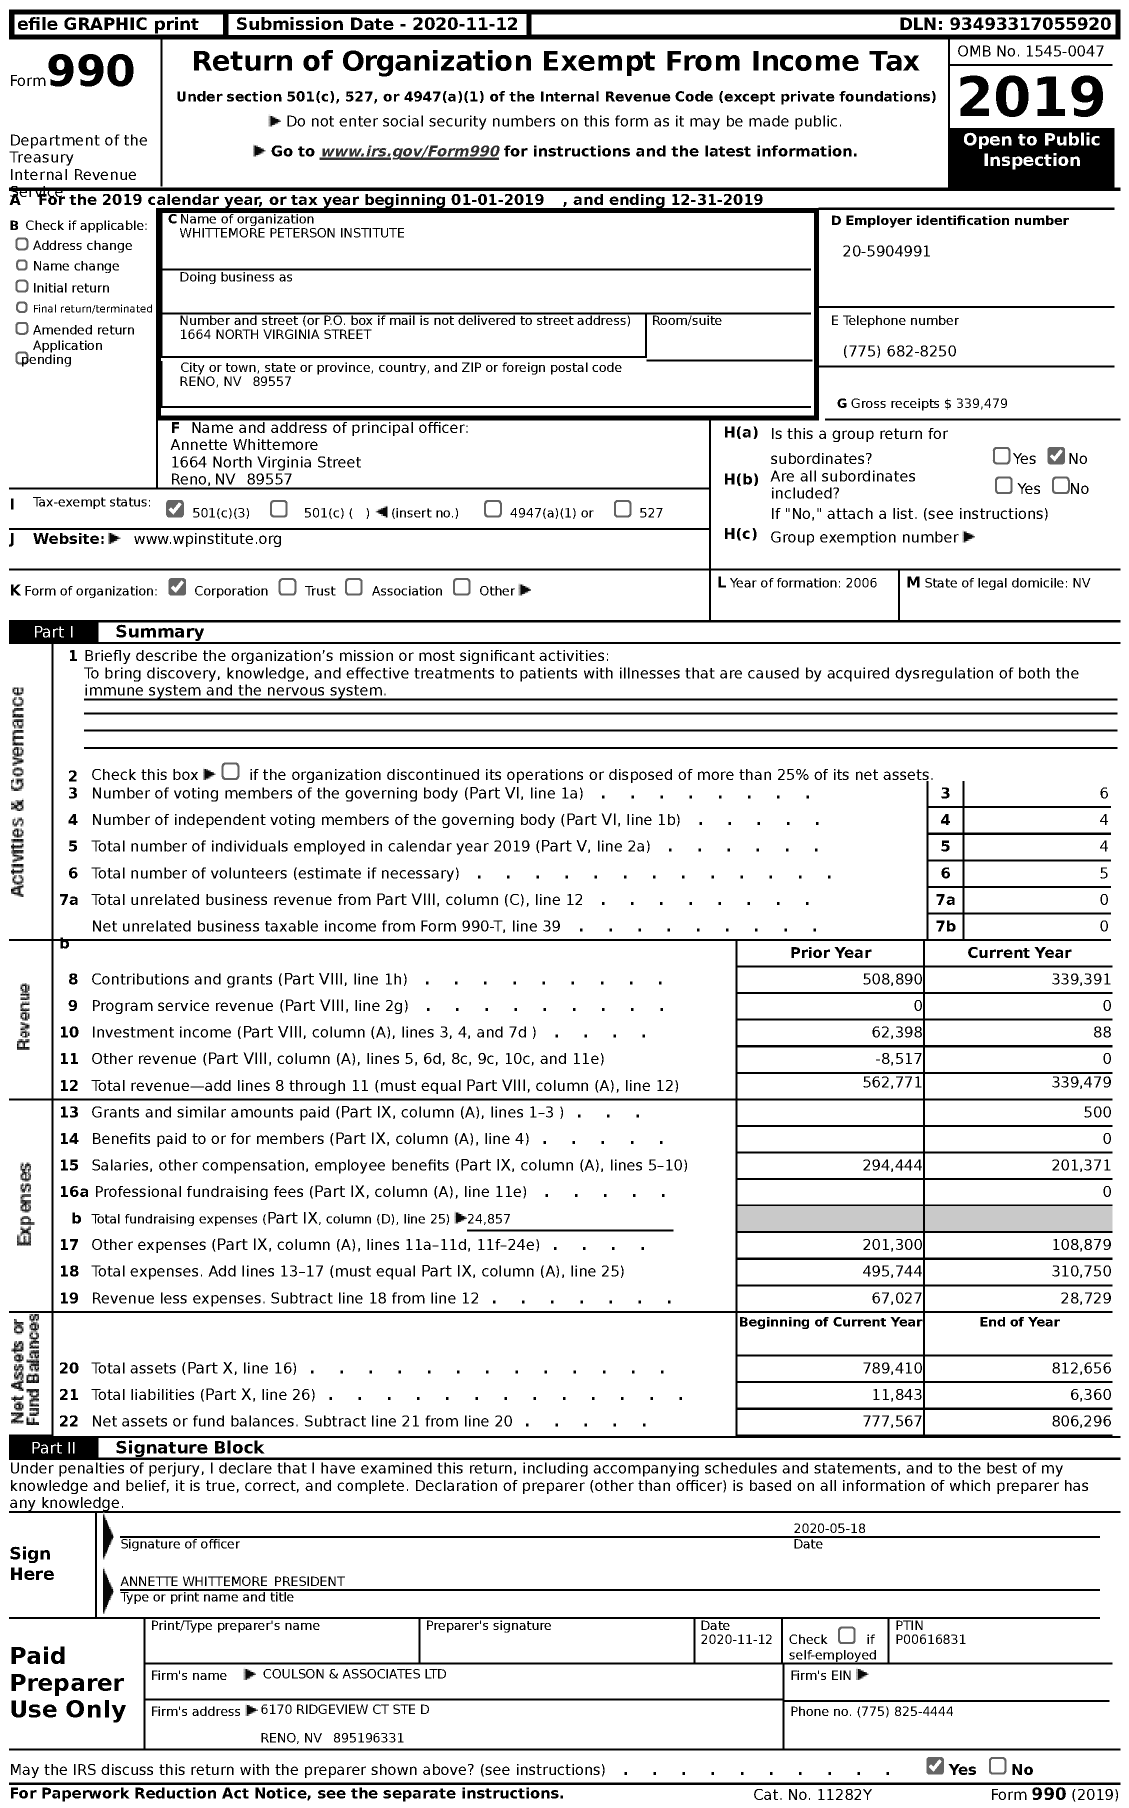 Image of first page of 2019 Form 990 for Whittemore Peterson Institute